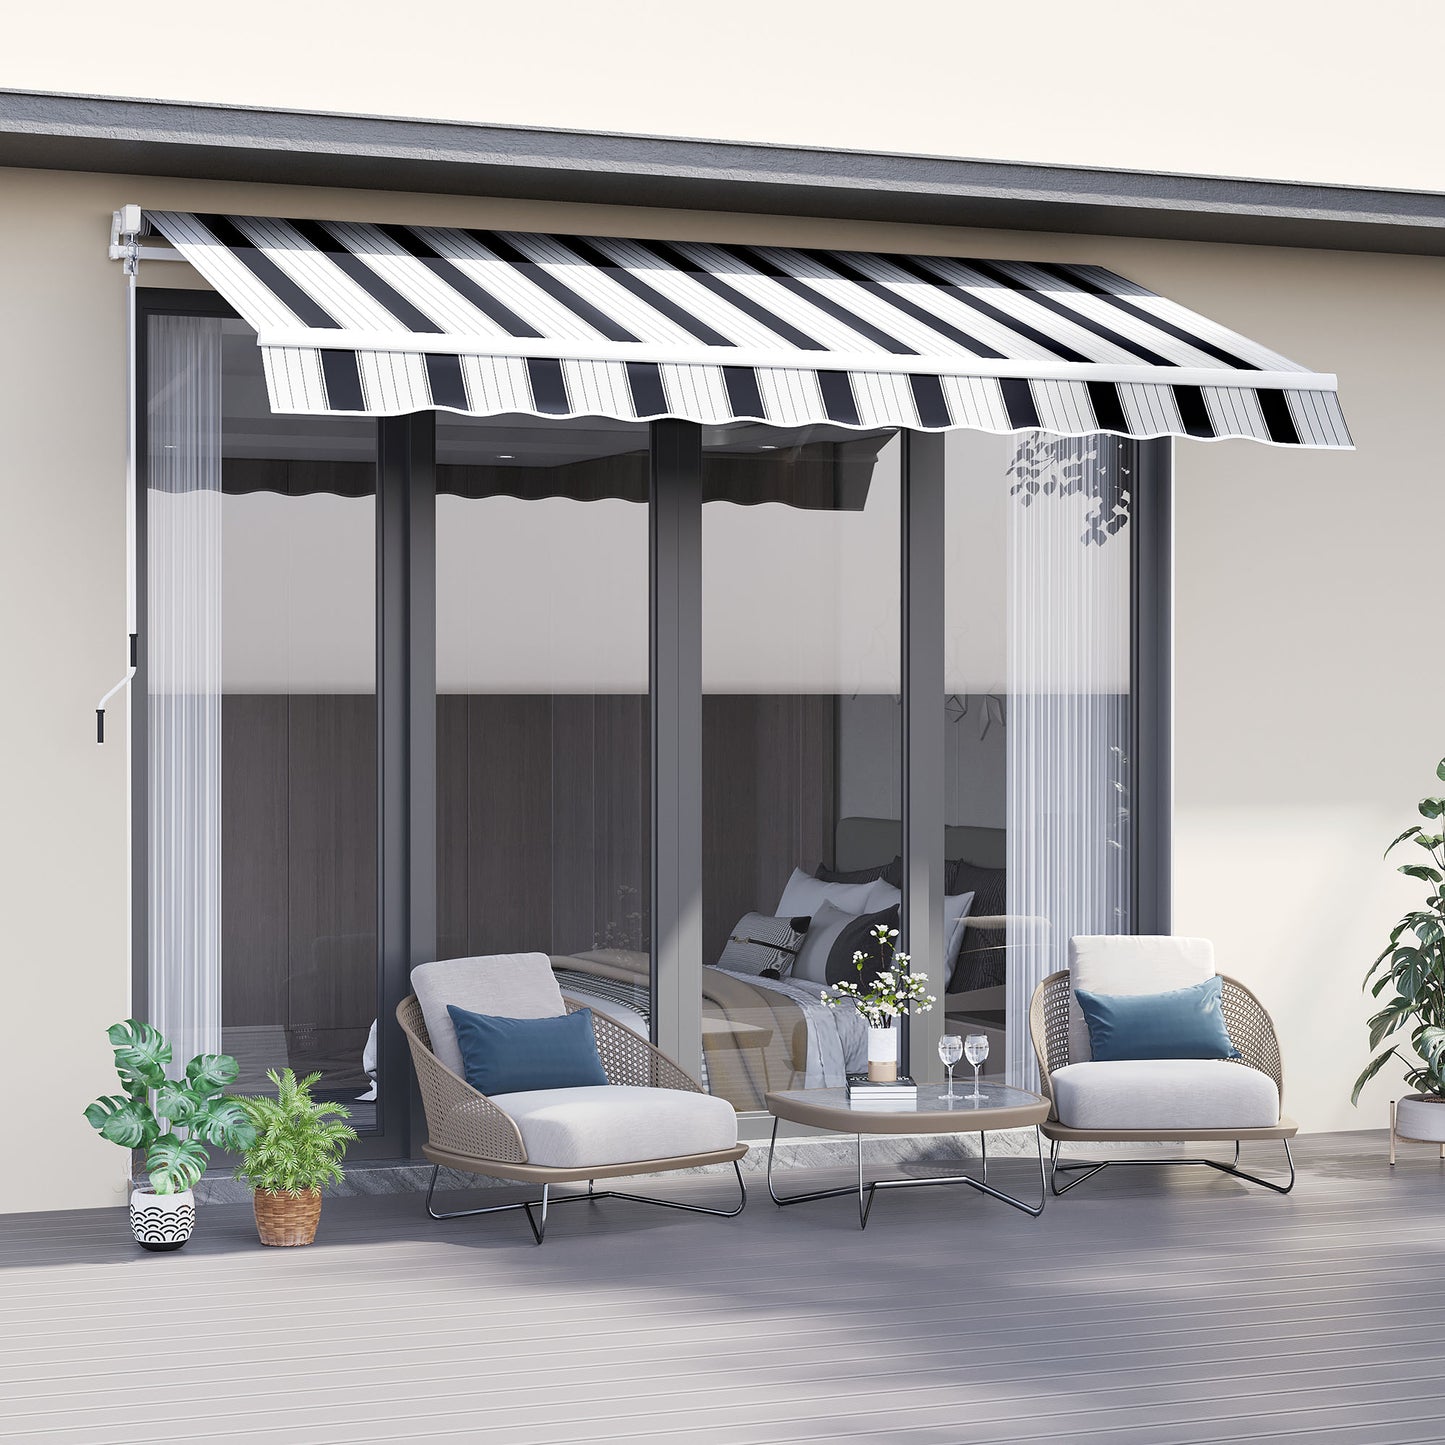 Outsunny Retractable Garden Awning 2.5x2 m Blue White Strips Patio Manual Canopy Sun Shade Shelter with Winding Handle